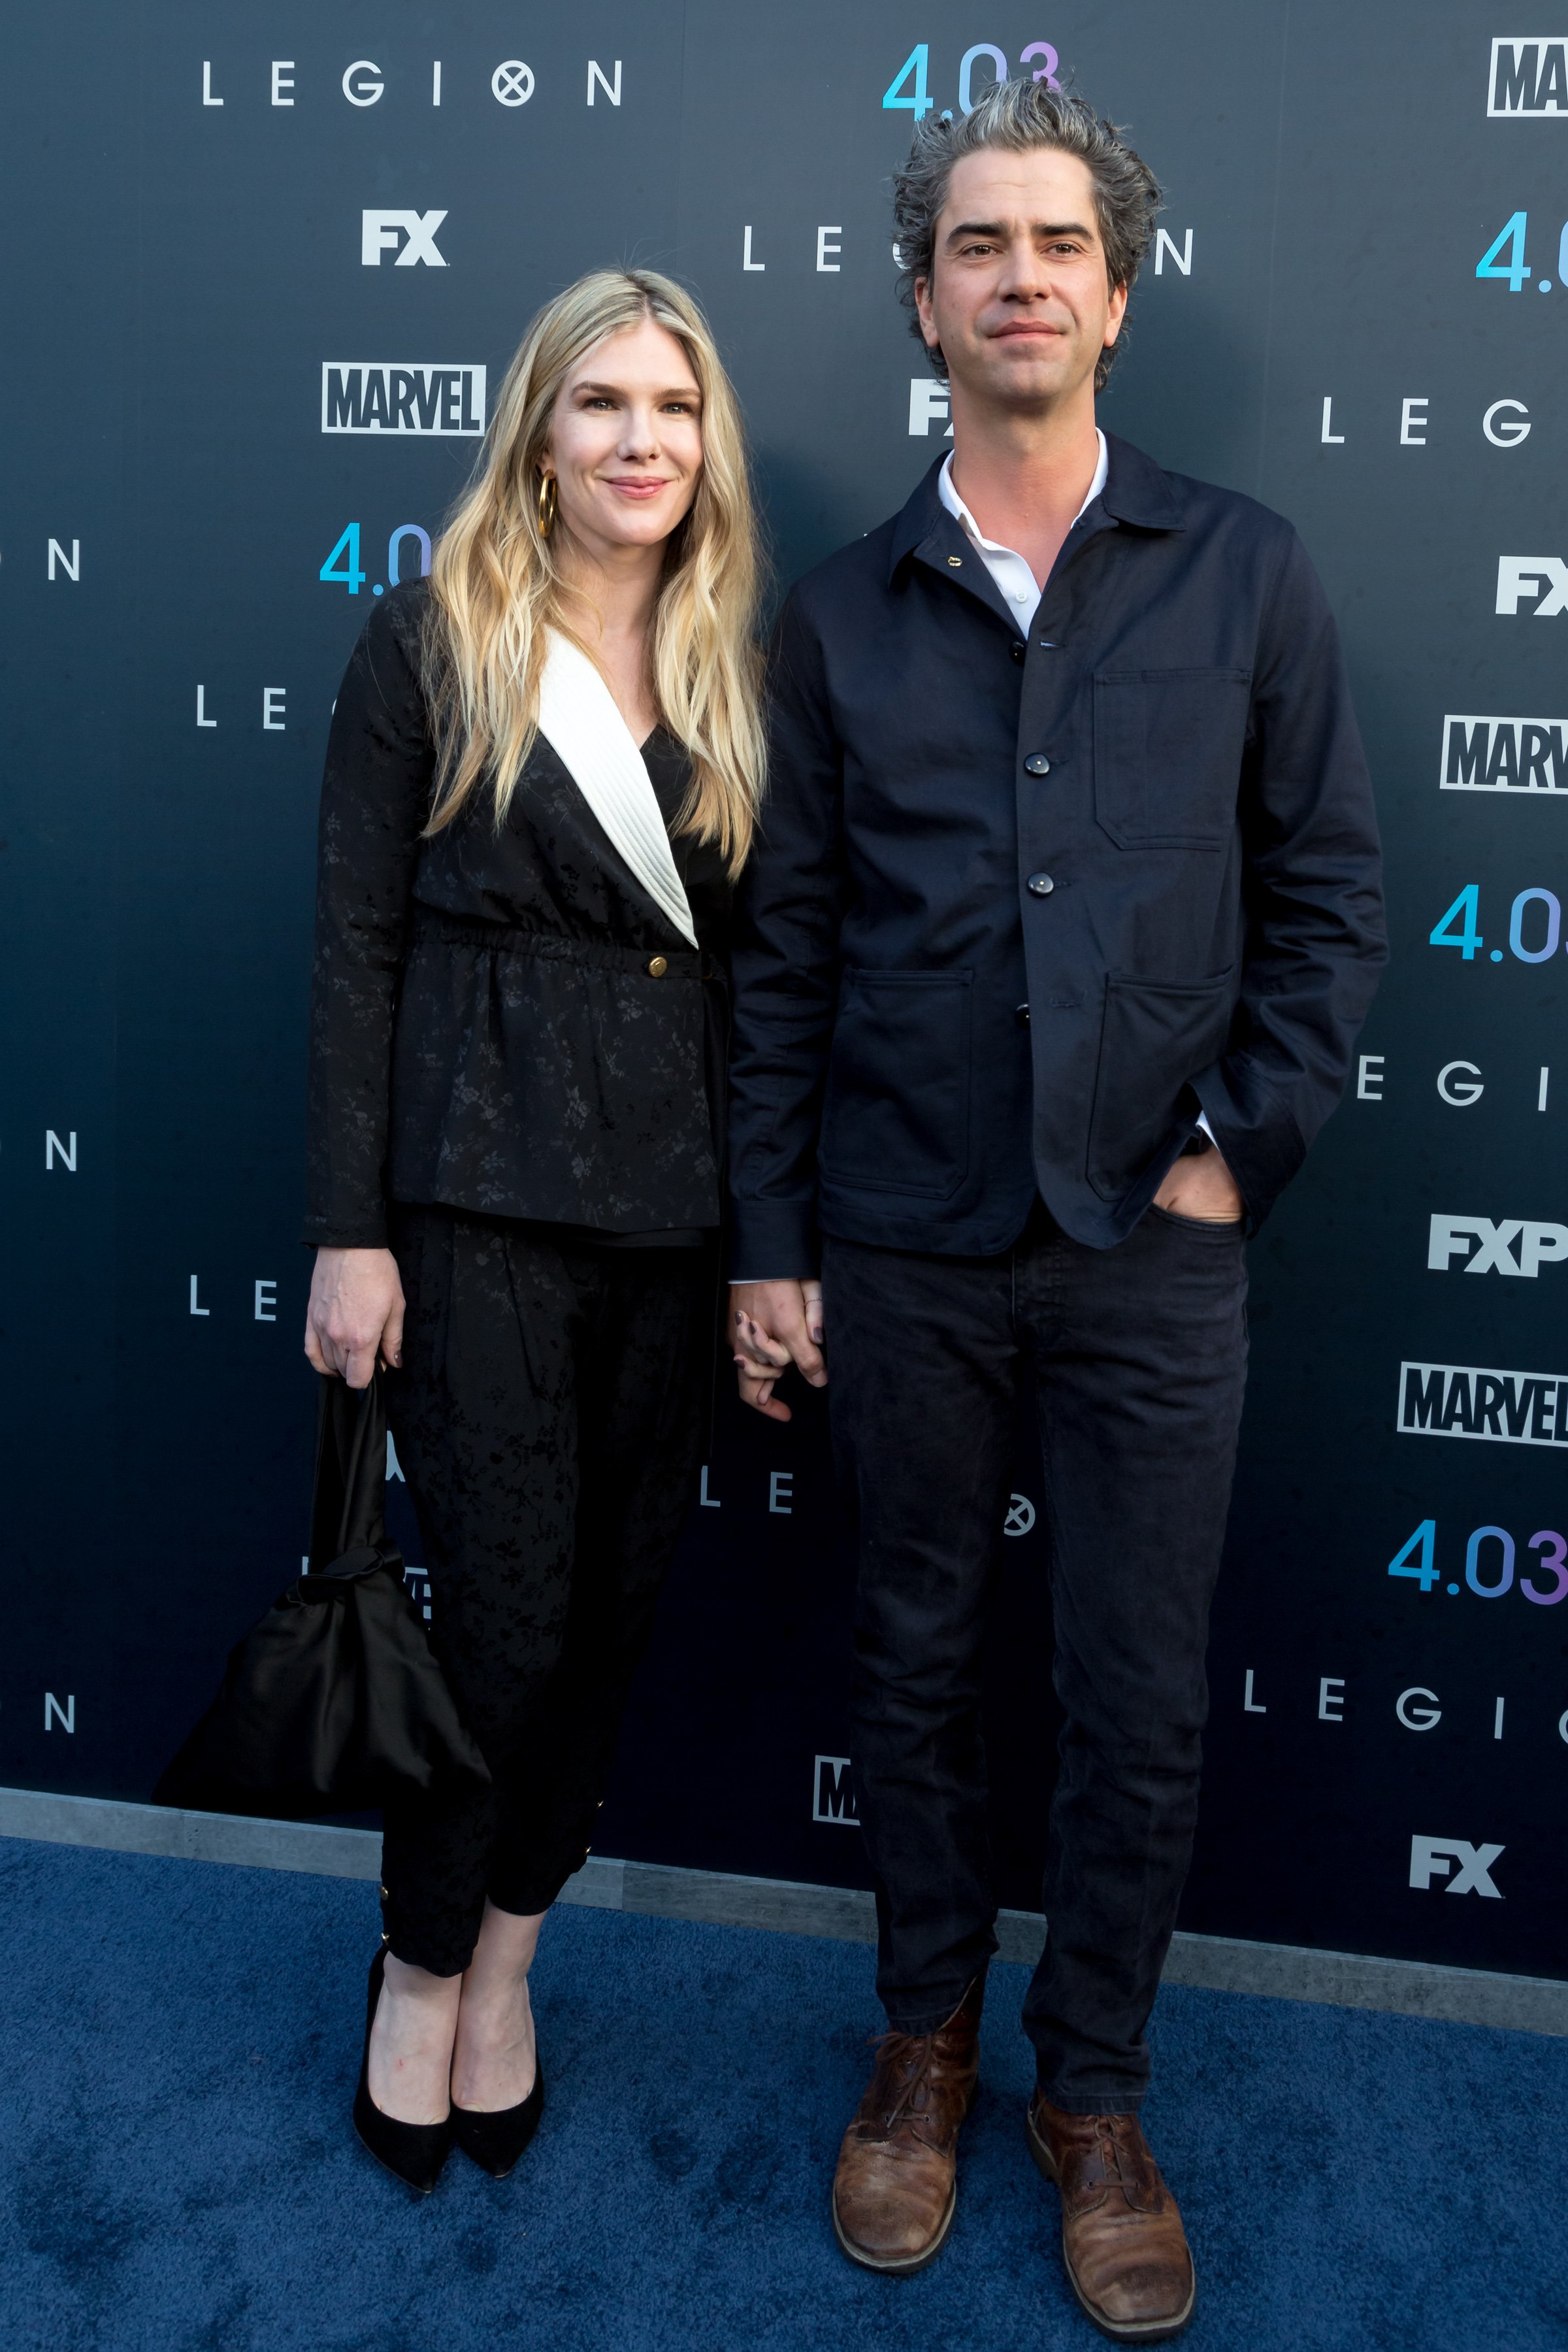  Lily Rabe and Hamish Linklater attend the "Legion" Season 2 Premiere at DGA Theater on April 2, 2018 in Los Angeles, California | Photo: GettyImages